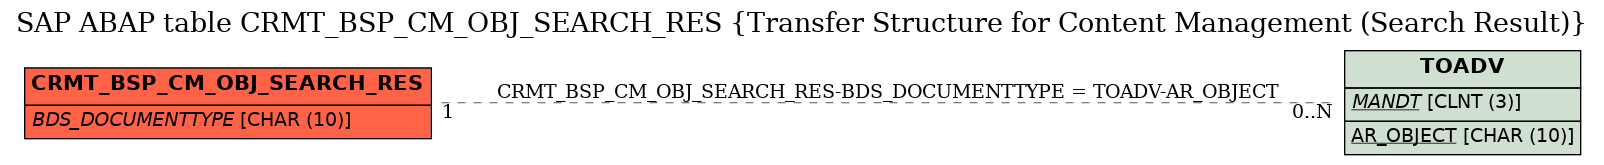 E-R Diagram for table CRMT_BSP_CM_OBJ_SEARCH_RES (Transfer Structure for Content Management (Search Result))